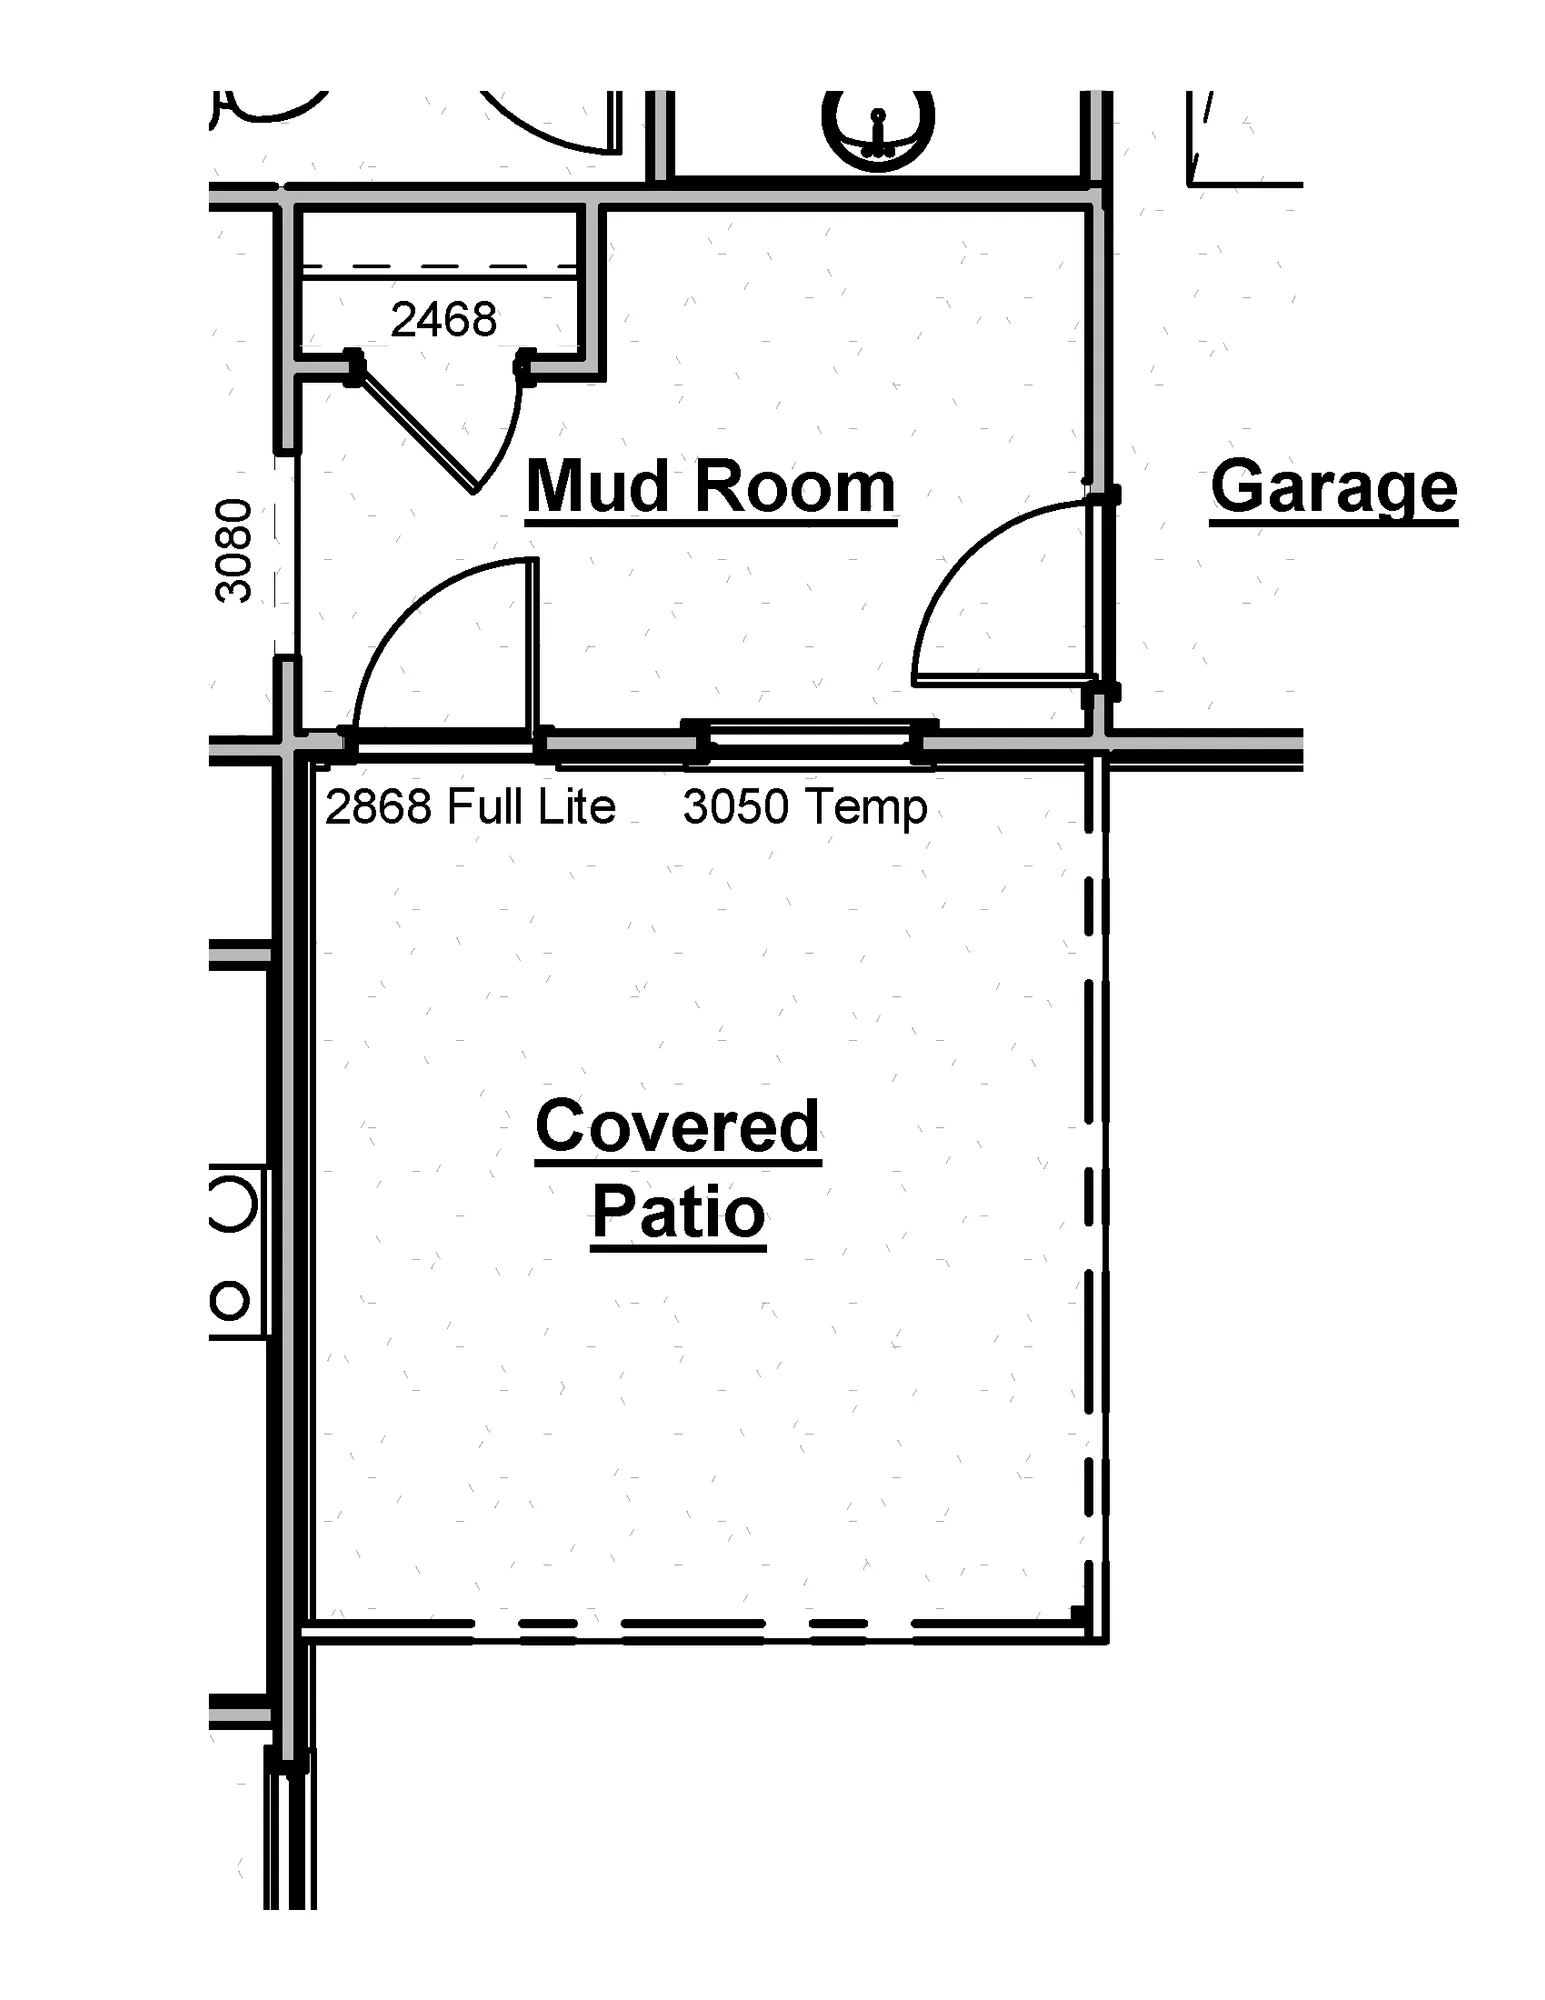 Mud Room w/ Covered Patio - undefined